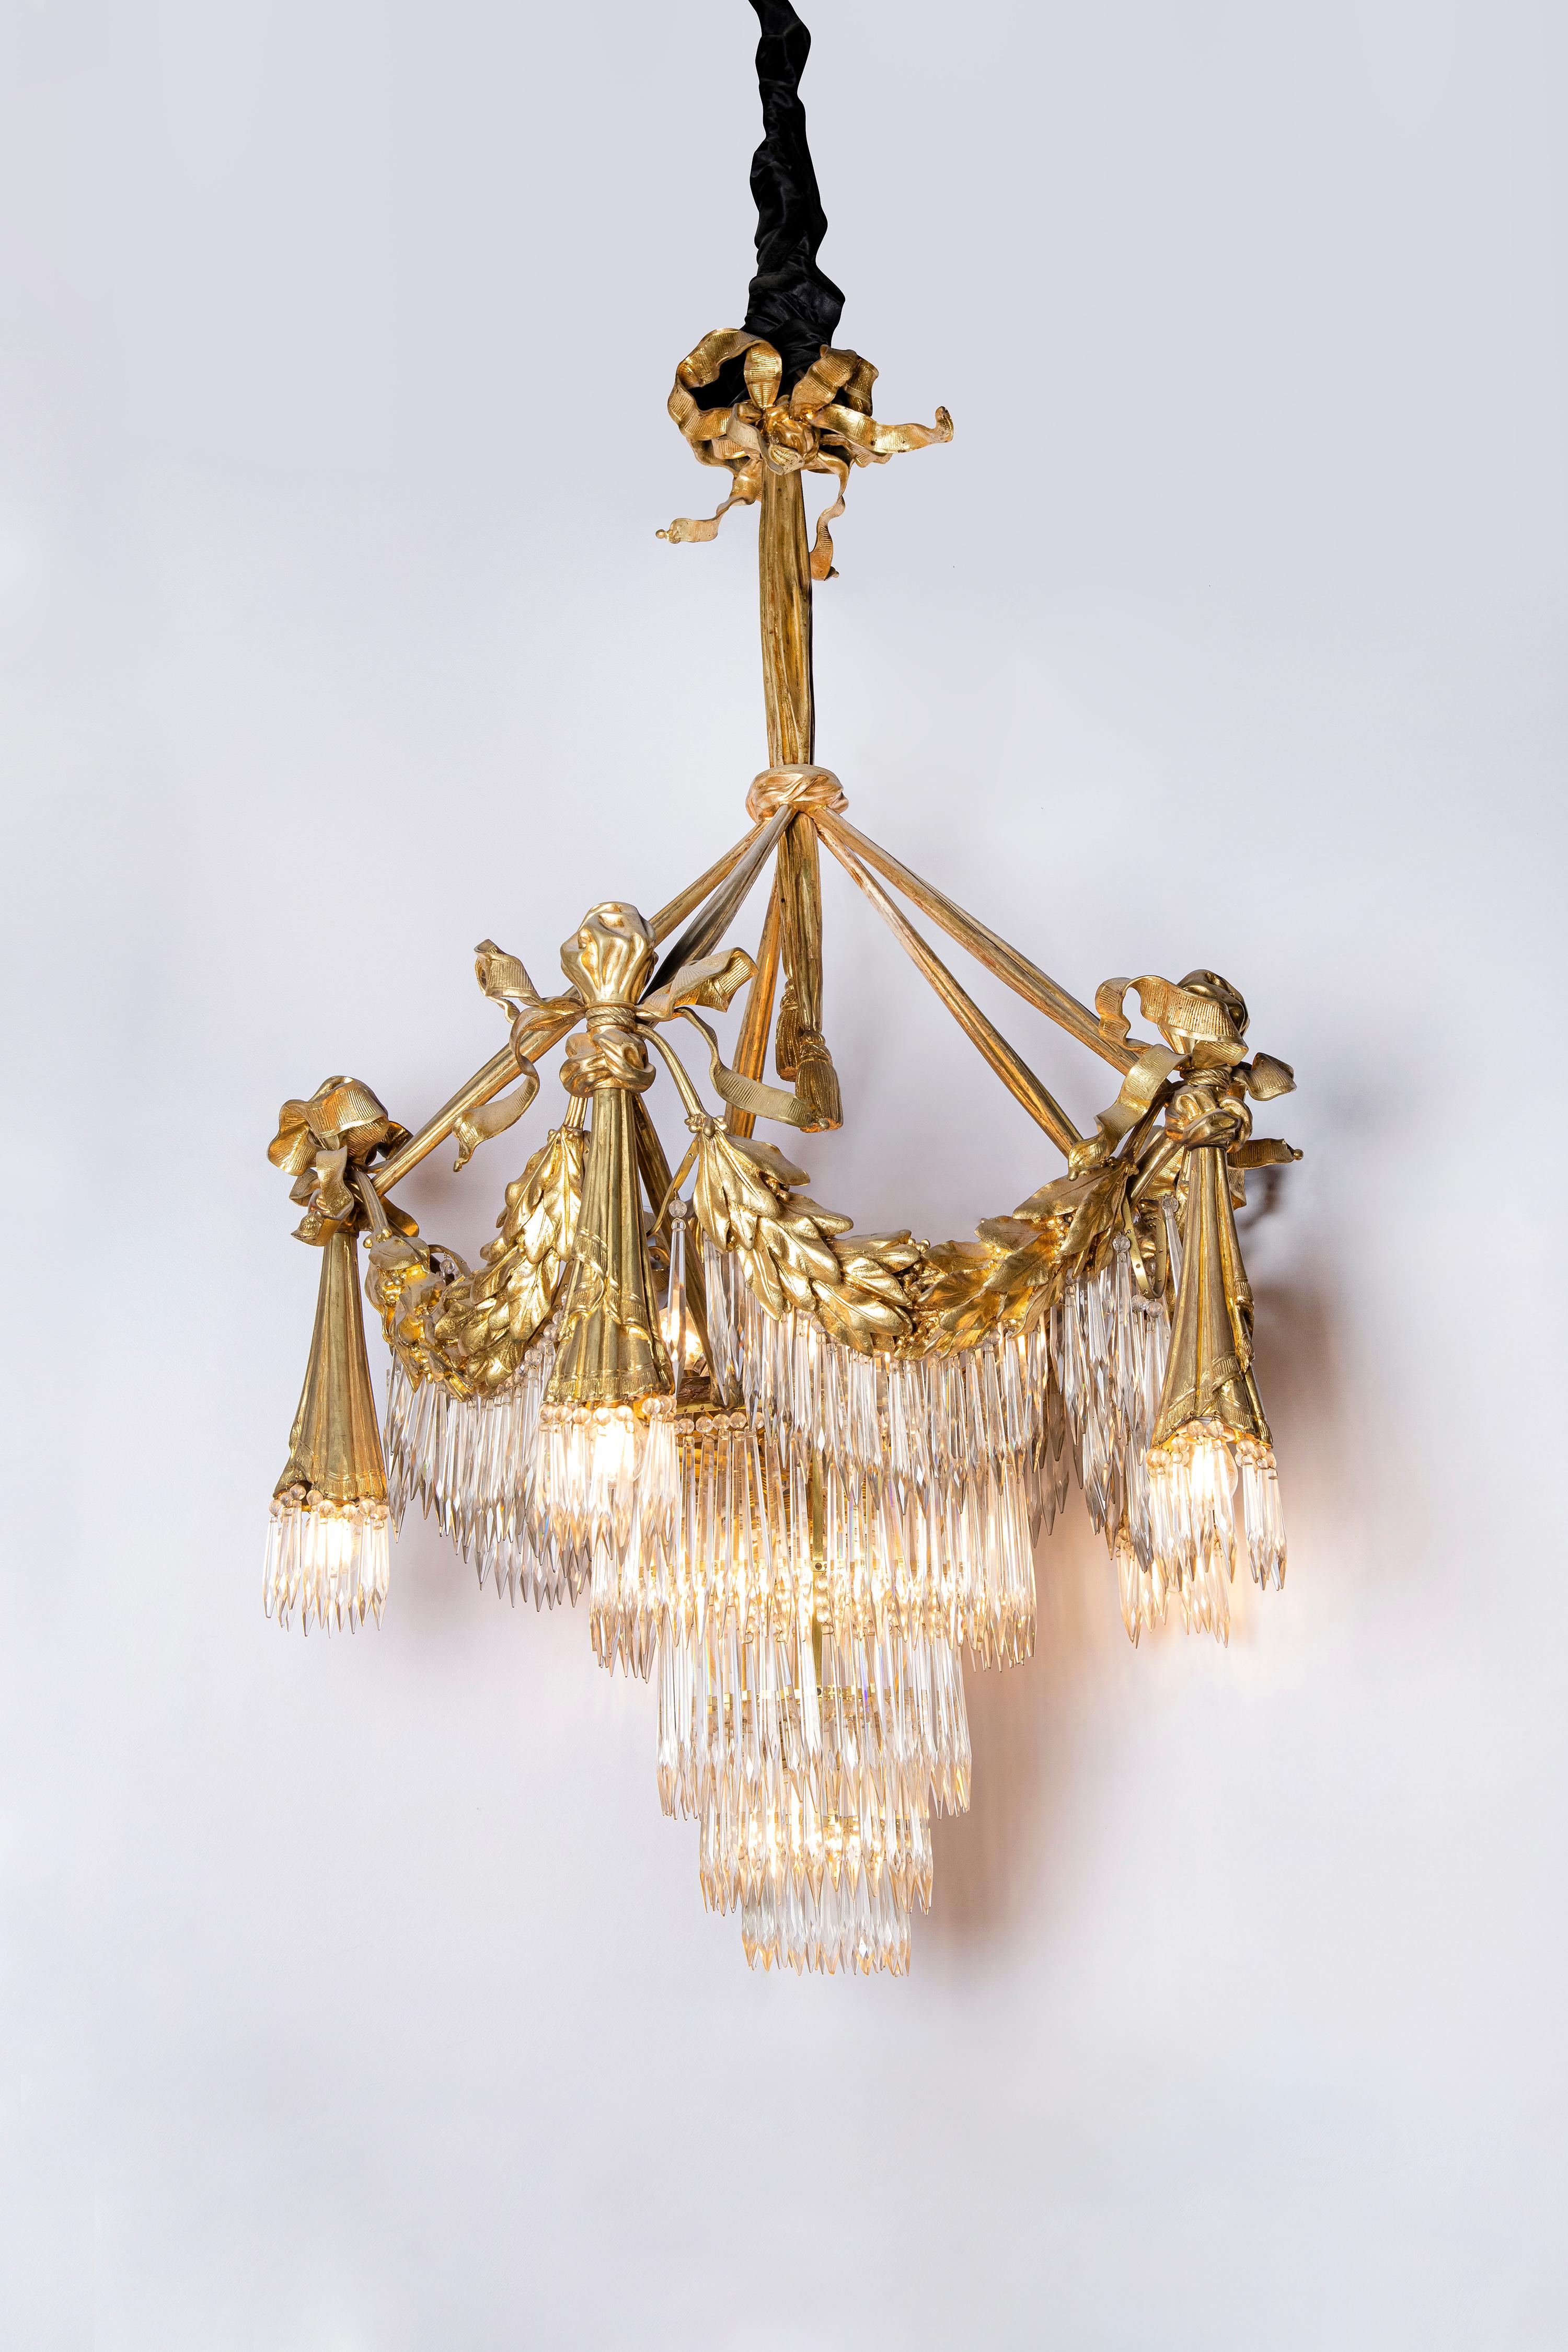 Pair of Ormolu bronze and Baccarat crystal chandeliers, France, circa 1870.
